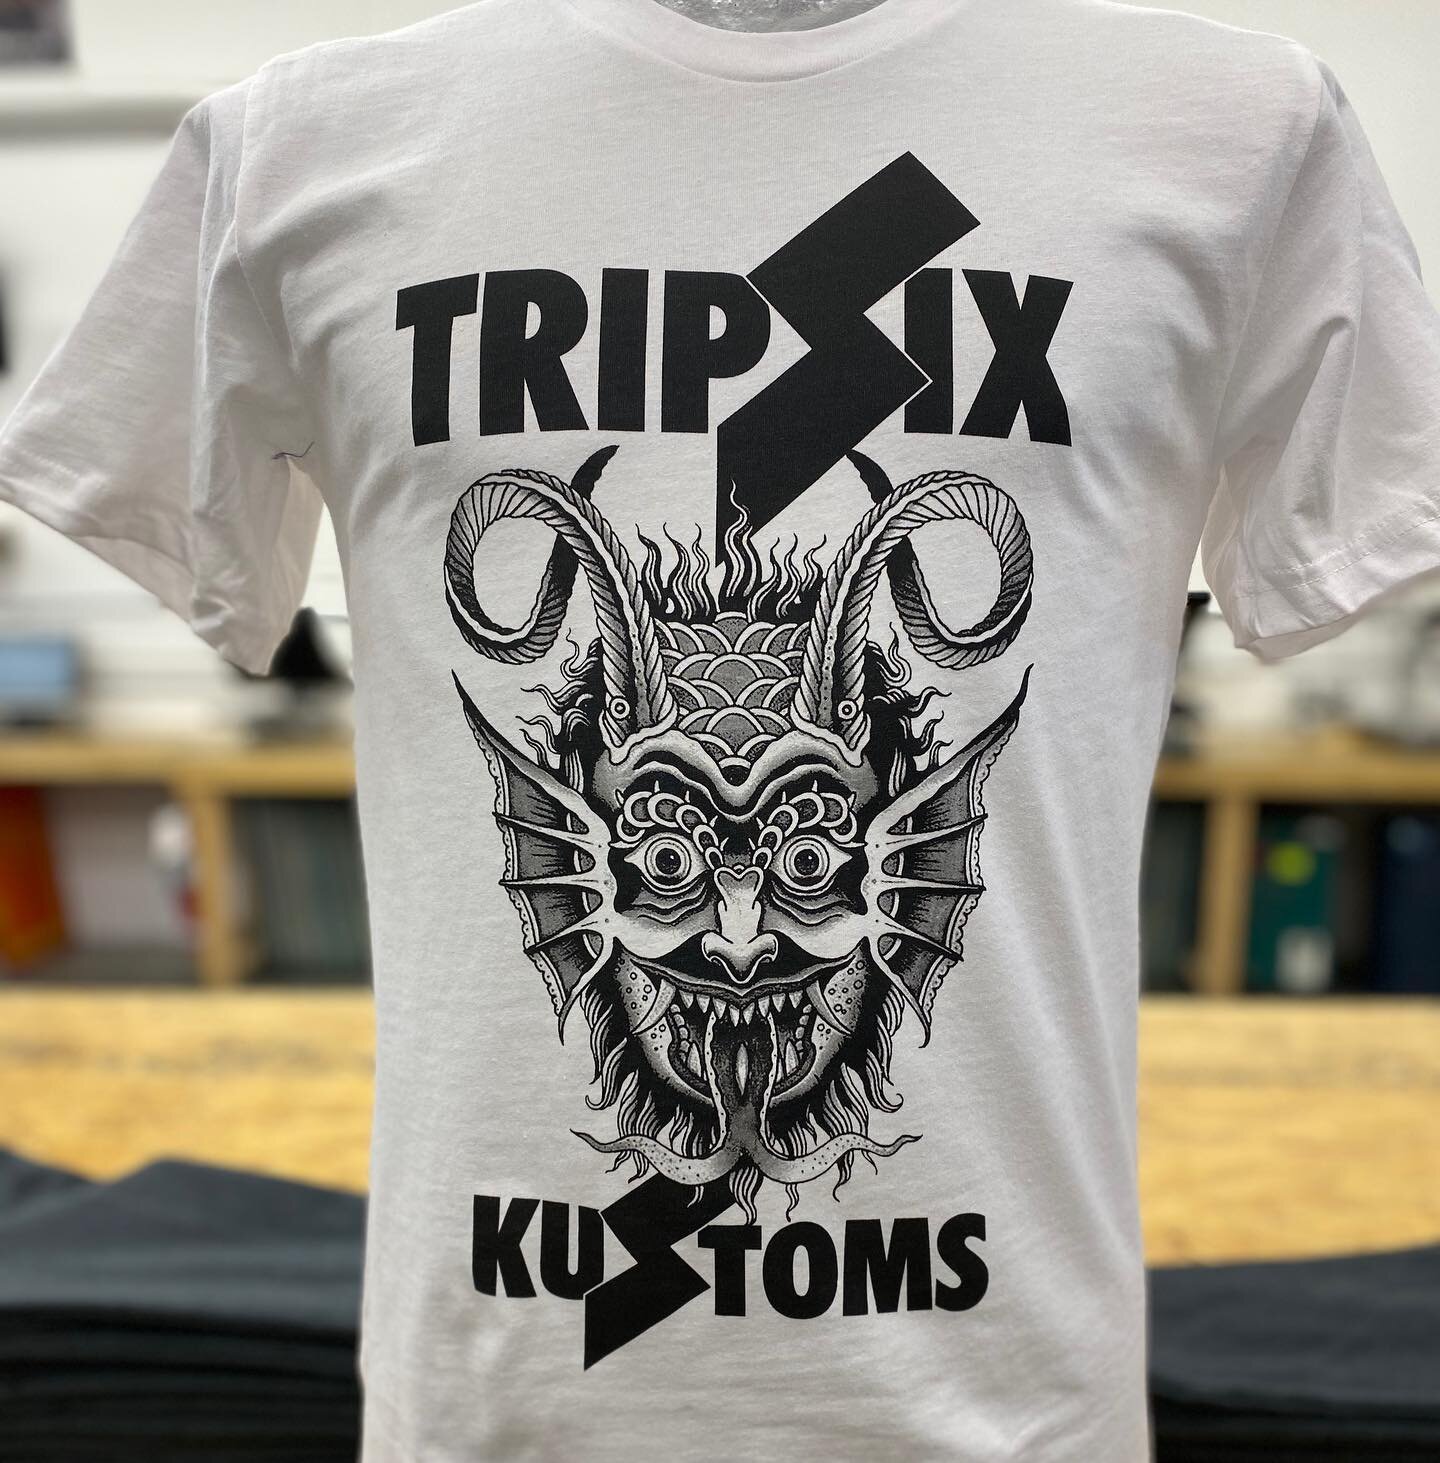 Check out these rad shirts we printed for @tripsixkustoms!  We are always stoked to work with Roy to bring his designs to life. Although the prints may not be as rad as the bikes he paints and builds.  Shoutout to Roy and Sandy for always trusting us